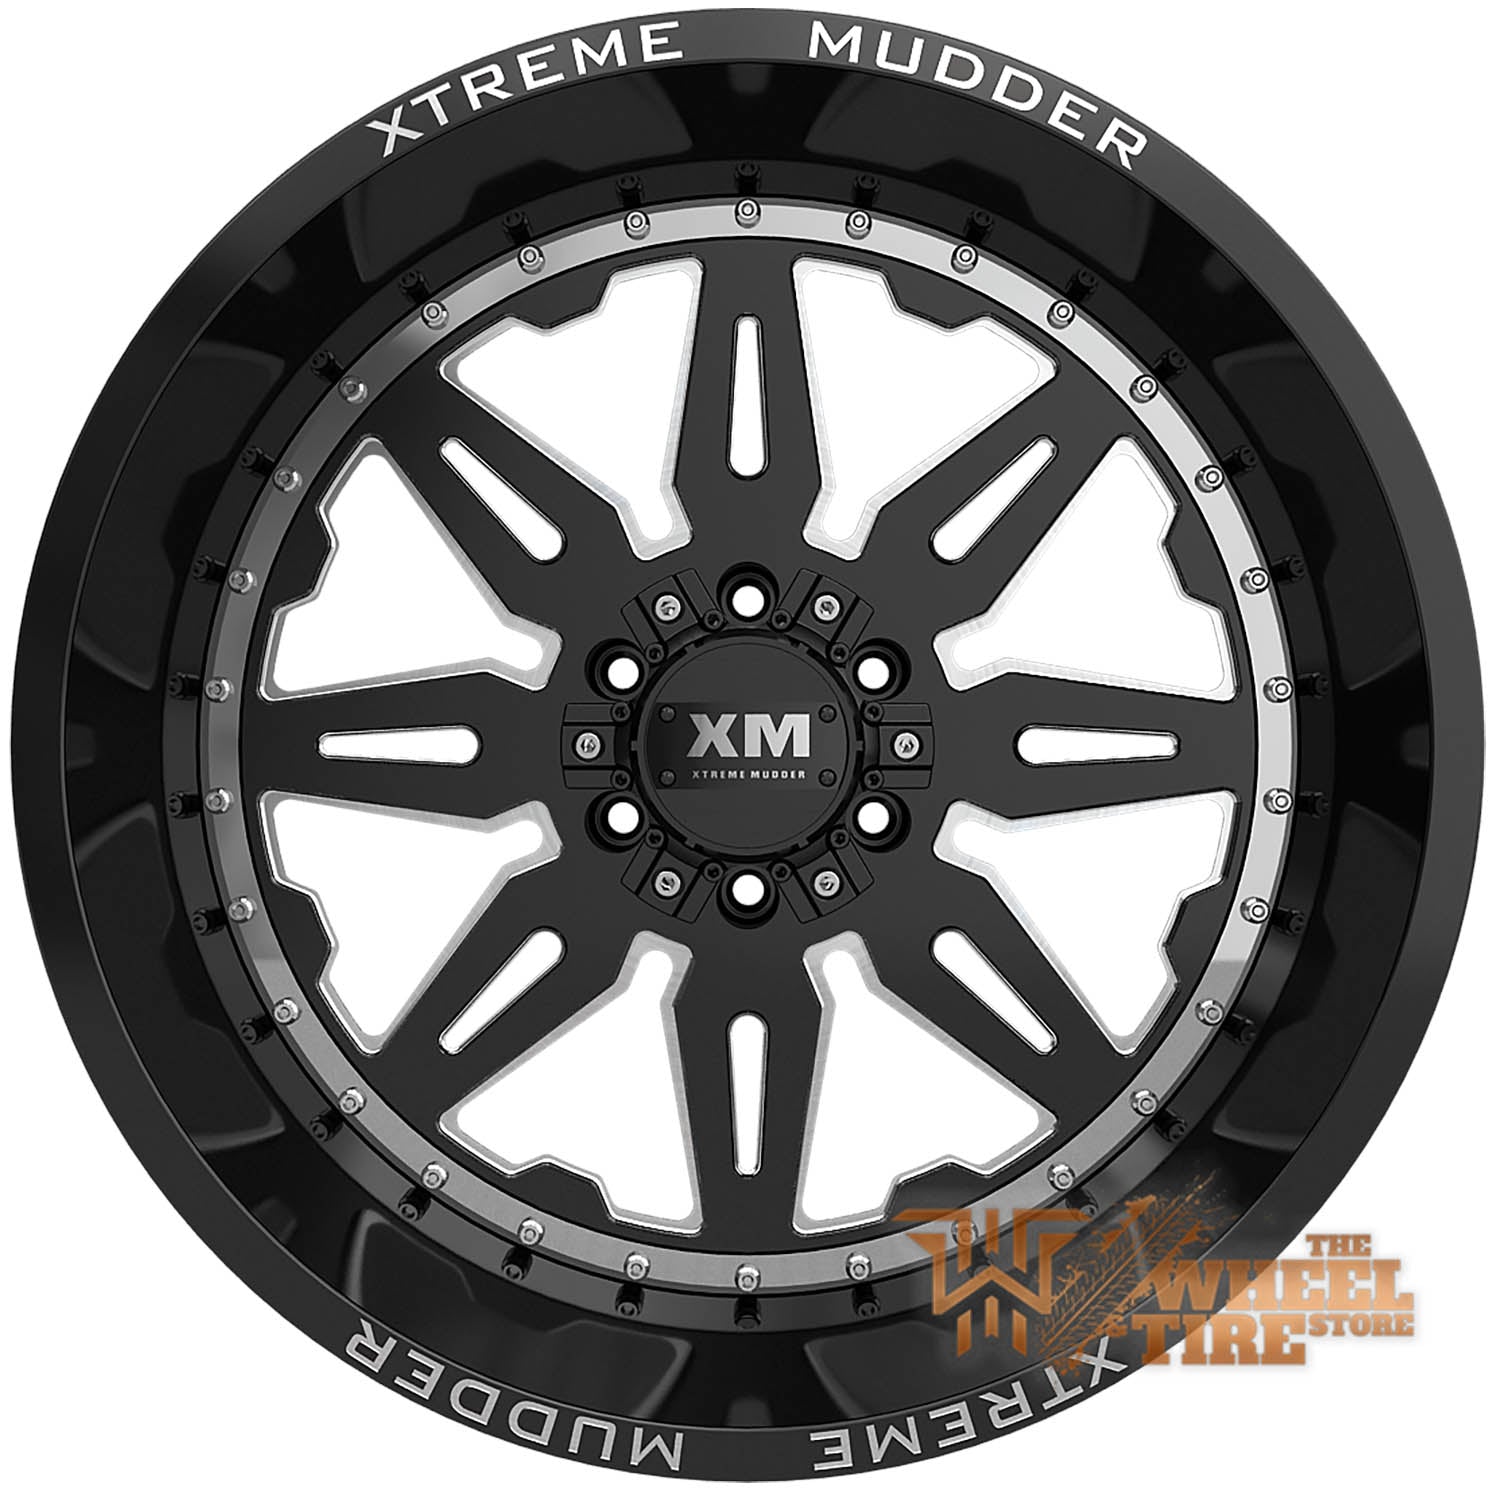 XTREME MUDDER XM-350 Wheel in Gloss Black Milled w/ Machined Ring (Set of 4)